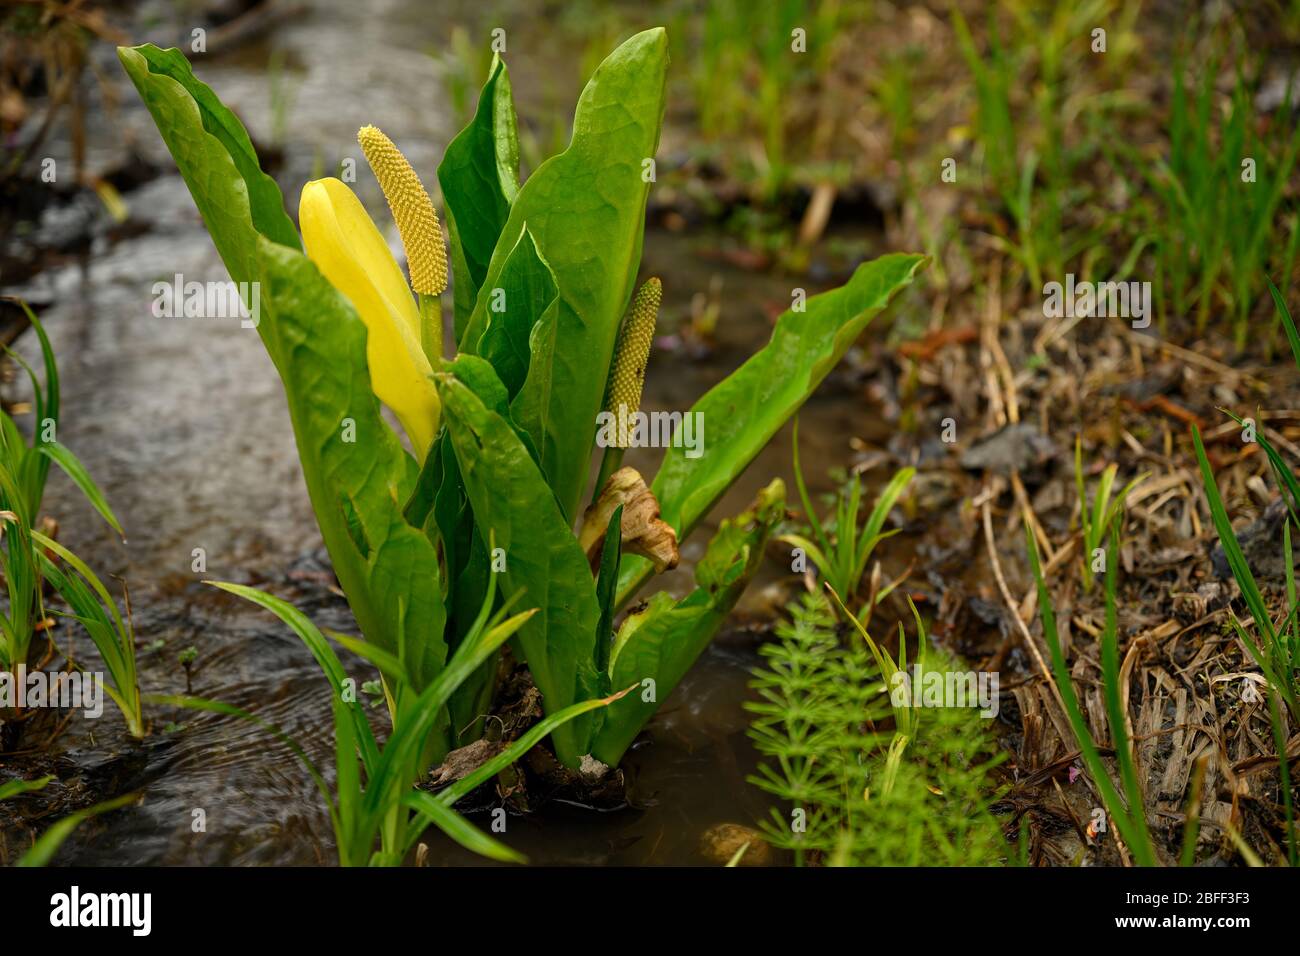 American skunk cabbage (Lysichiton americanus), also called western skunk cabbage, yellow skunk cabbage or swamp lantern, in its natural habitat, a we Stock Photo